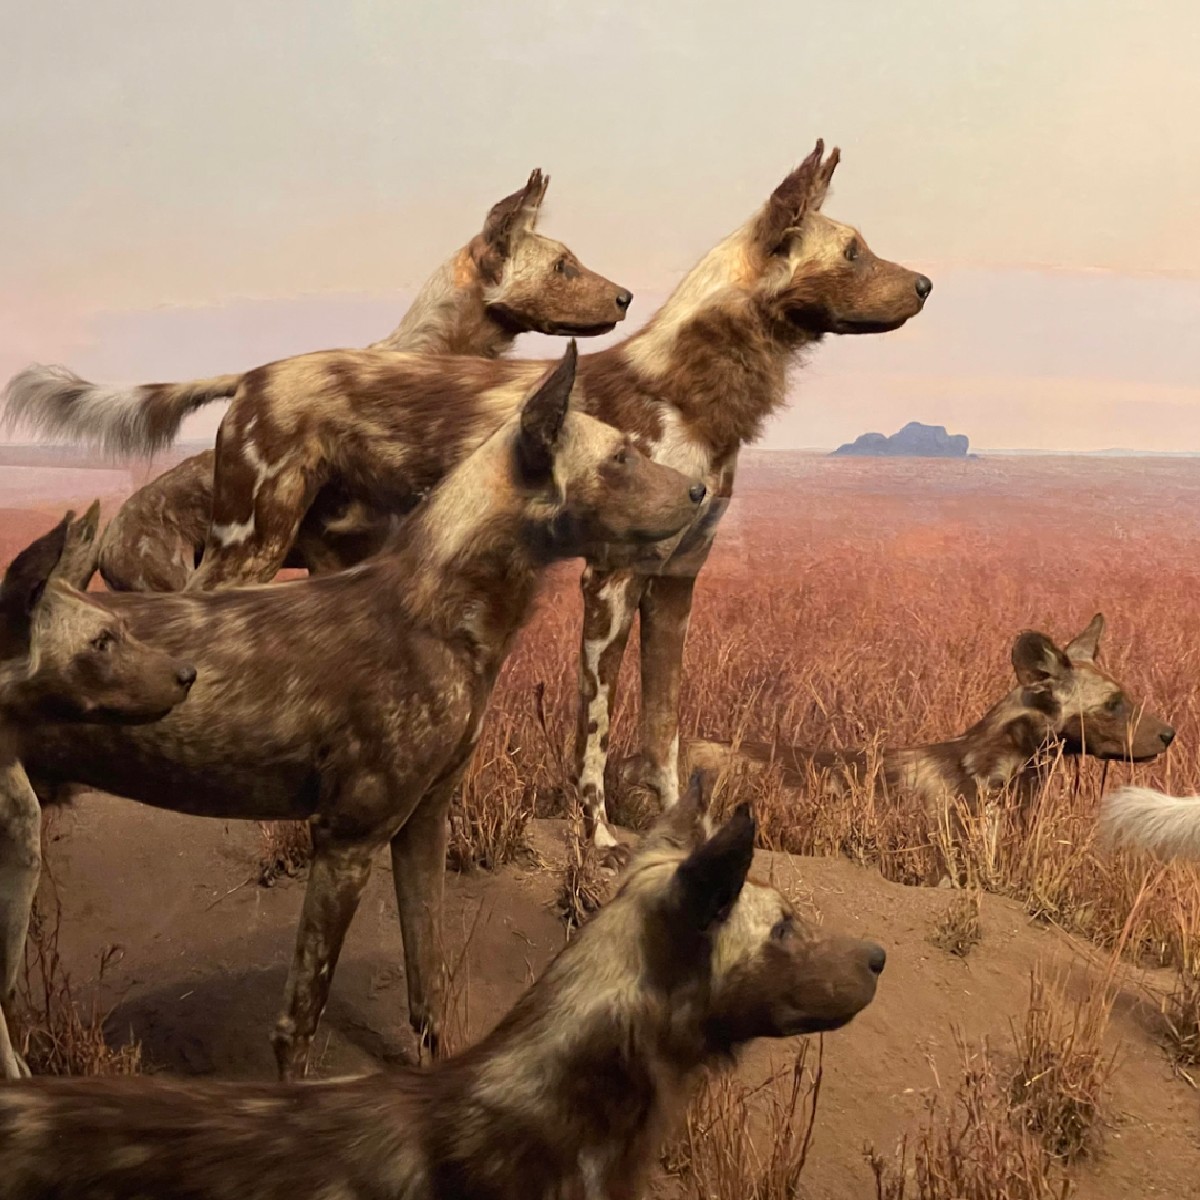 Today's Exhibit of the Day? The Hunting Dog Diorama! This scene depicts a group of predatory dogs gazing at a distant zebra. These carnivores are some of Africa's most formidable, with a hunting success rate of more than 70%—far higher than that of lions or leopards.